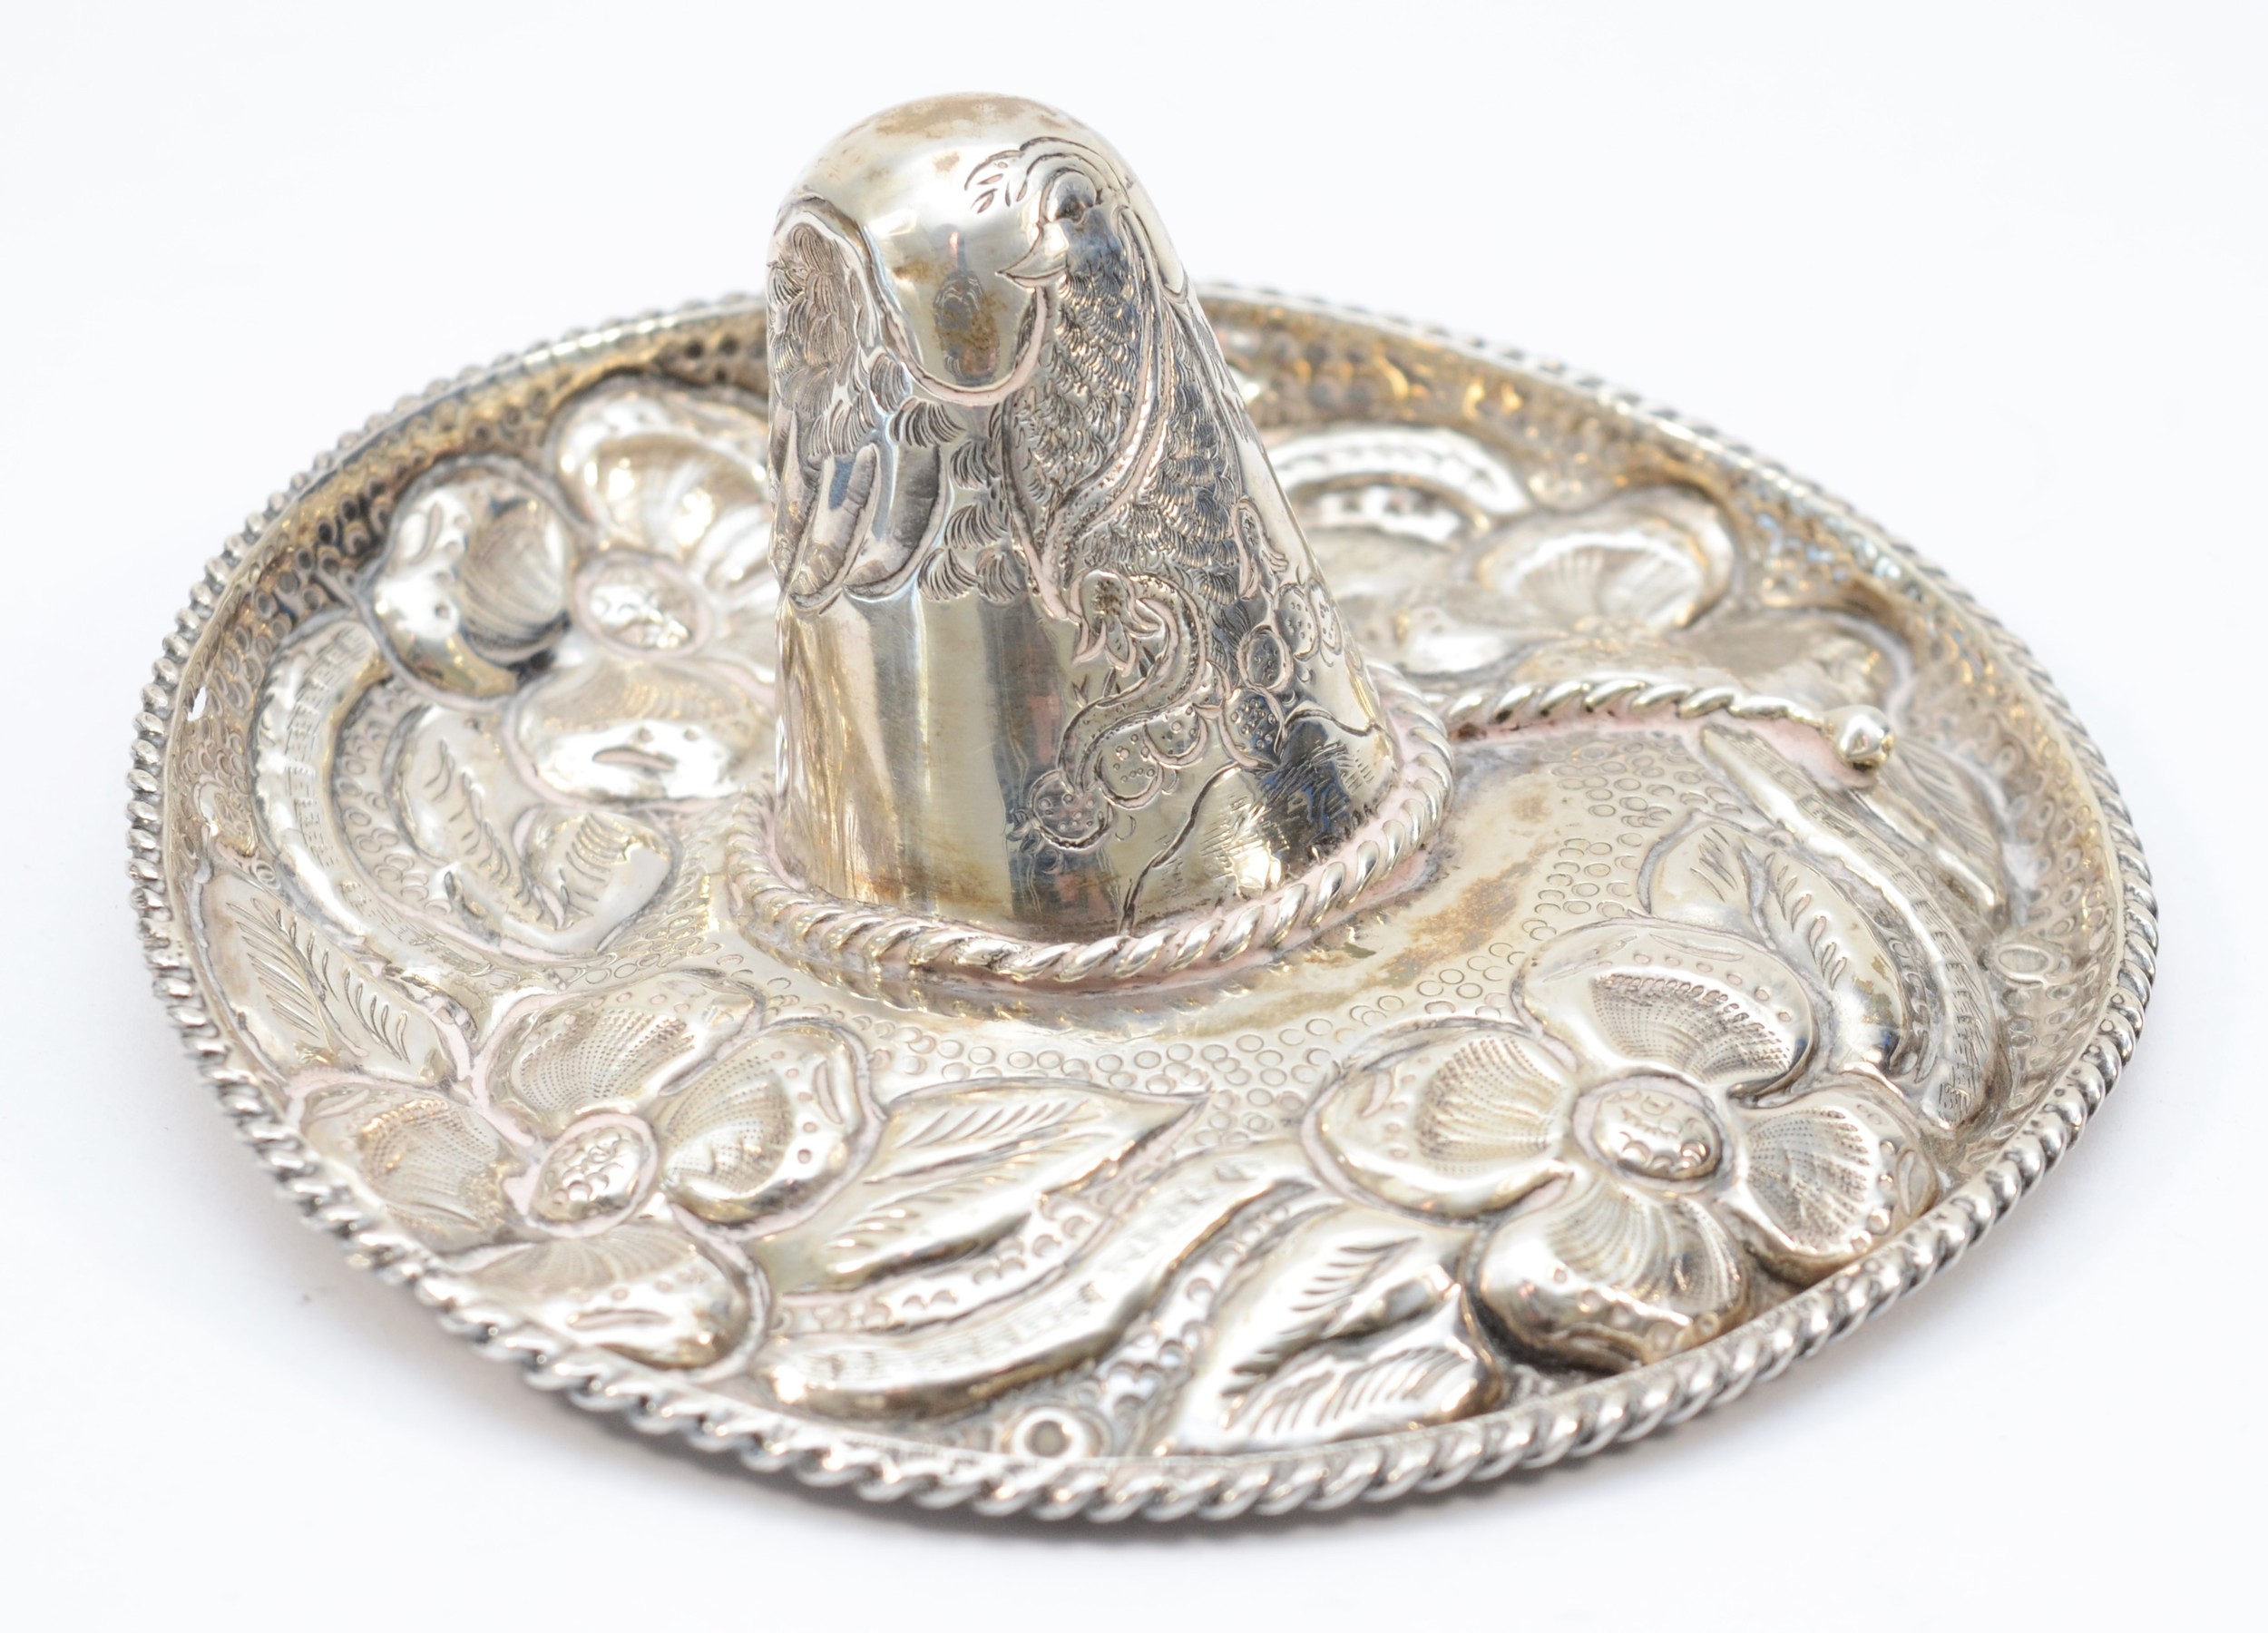 A Mexican Sterling Silver hat, with embossed and chased floral decoration, diameter 13cm, 91gms - Image 2 of 3